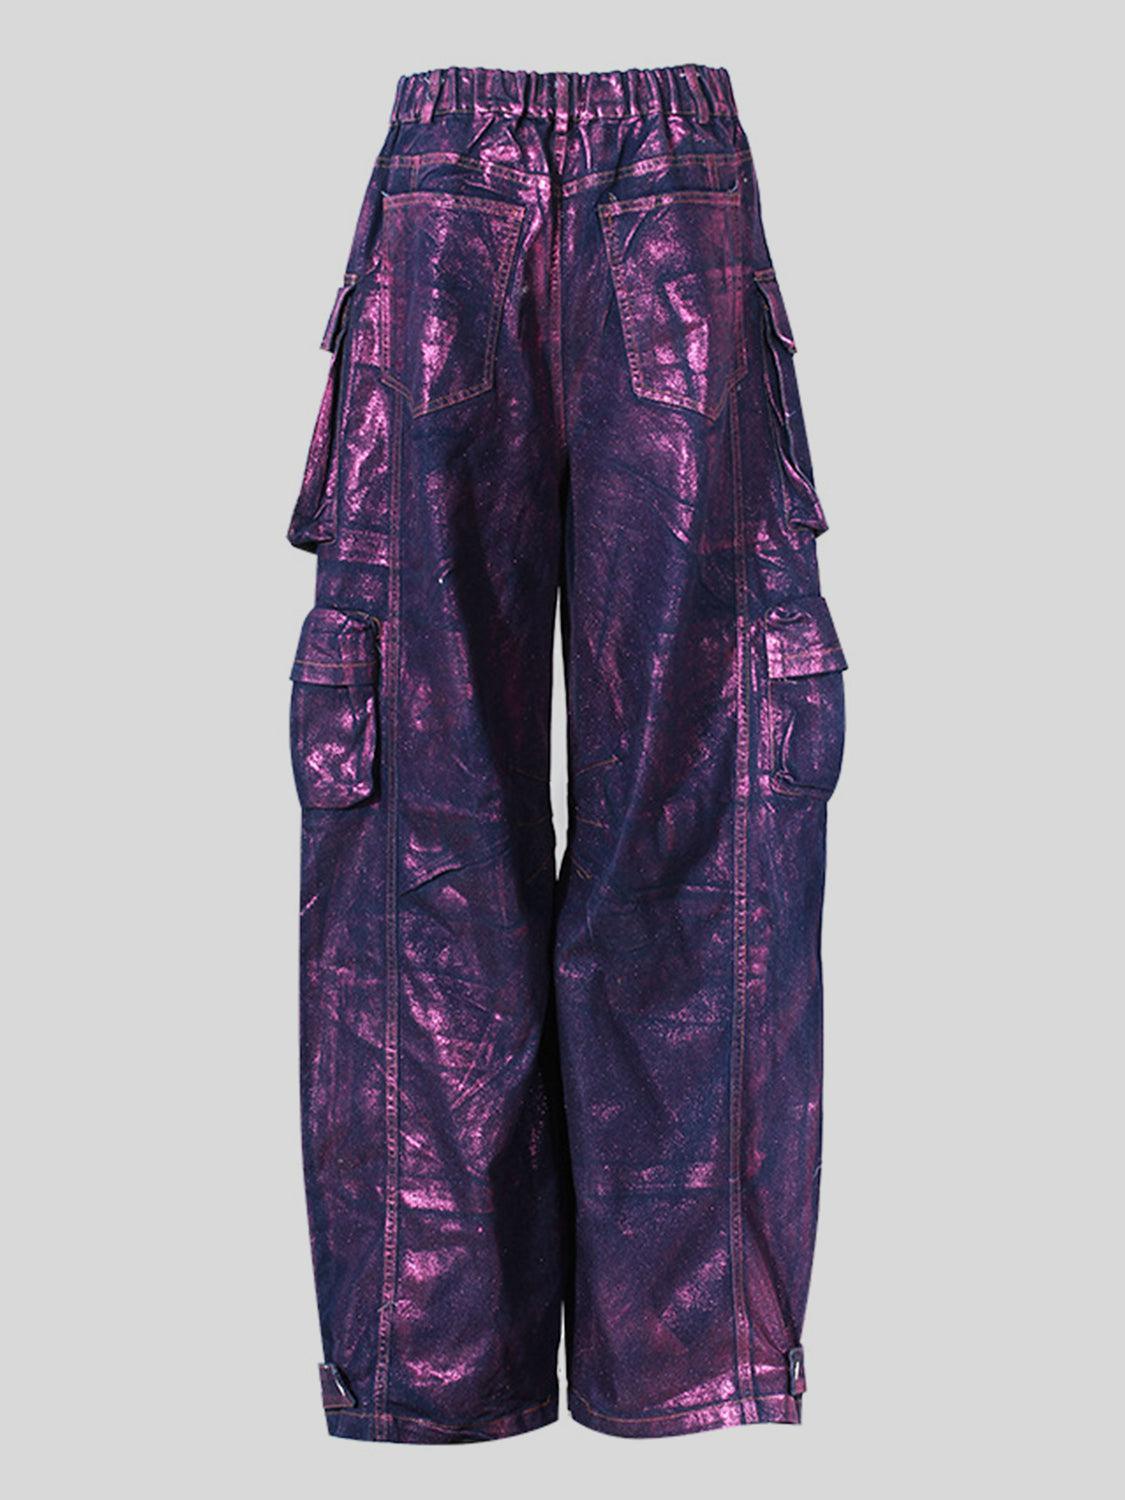 a pair of purple pants with pockets